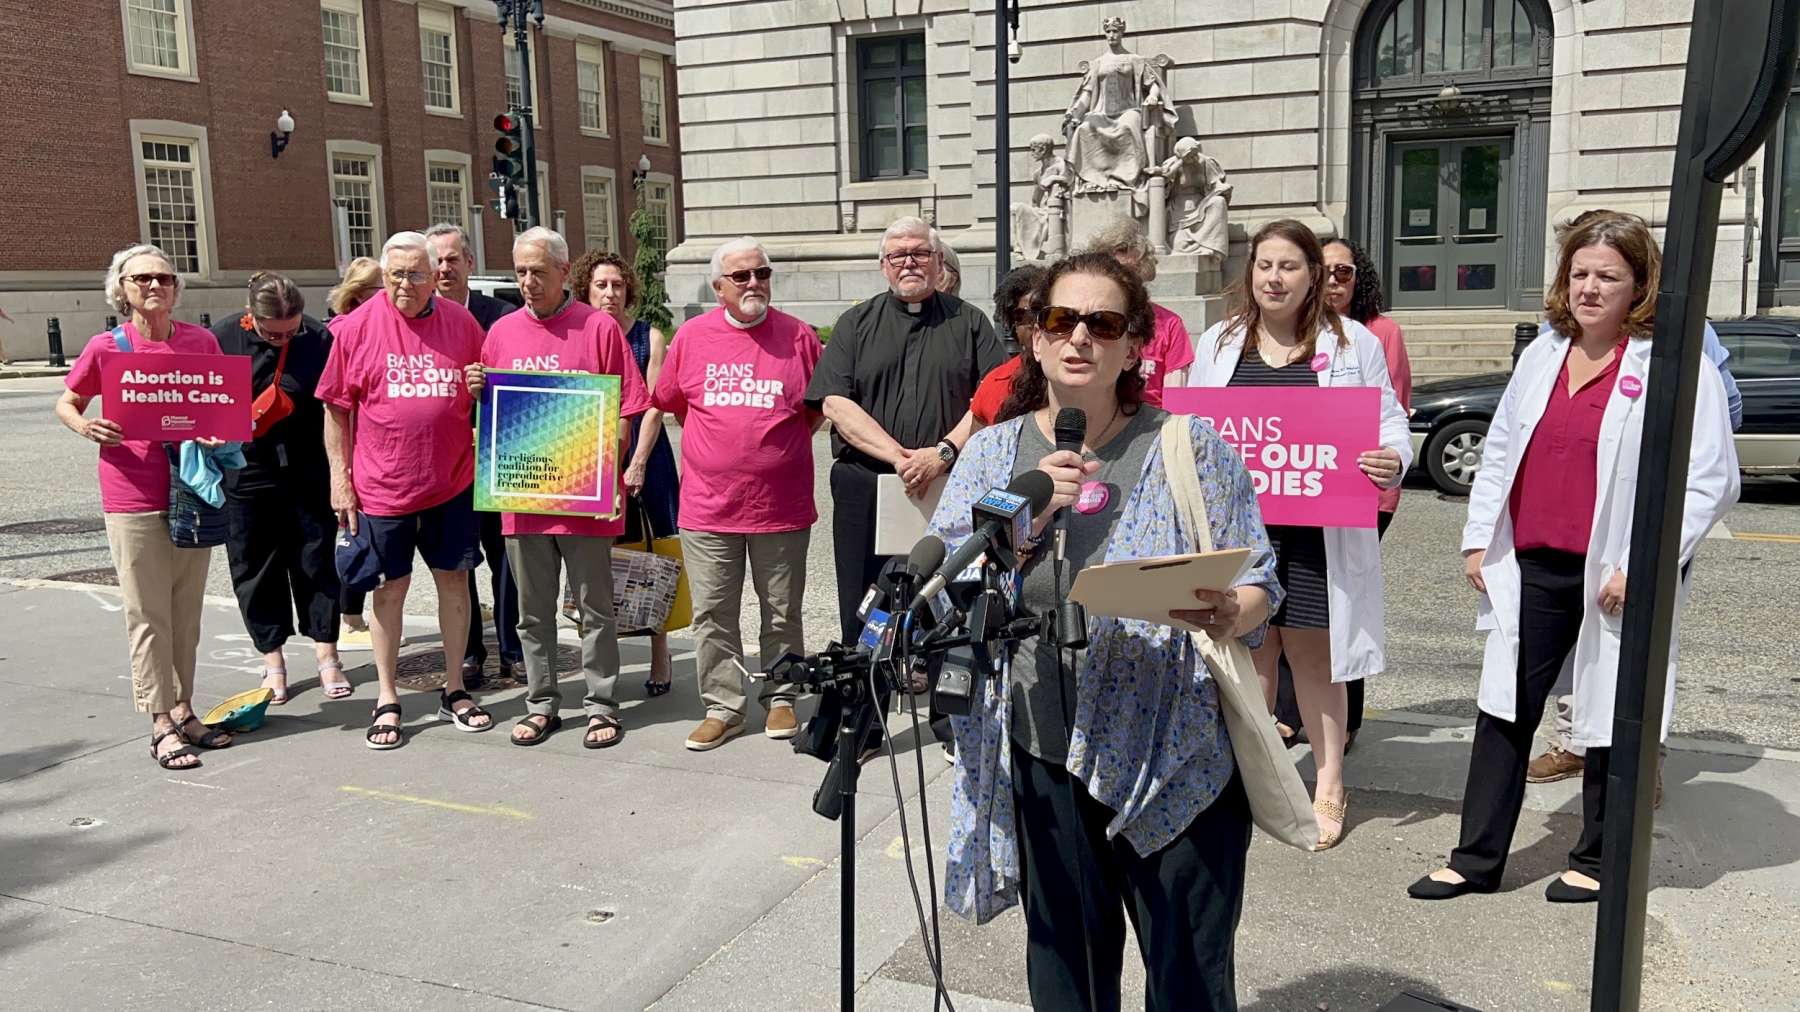 Rhode Island News: “We are outraged, and we are horrified,” says RI Coalition for Reproductive Freedom in response to Roe reversal